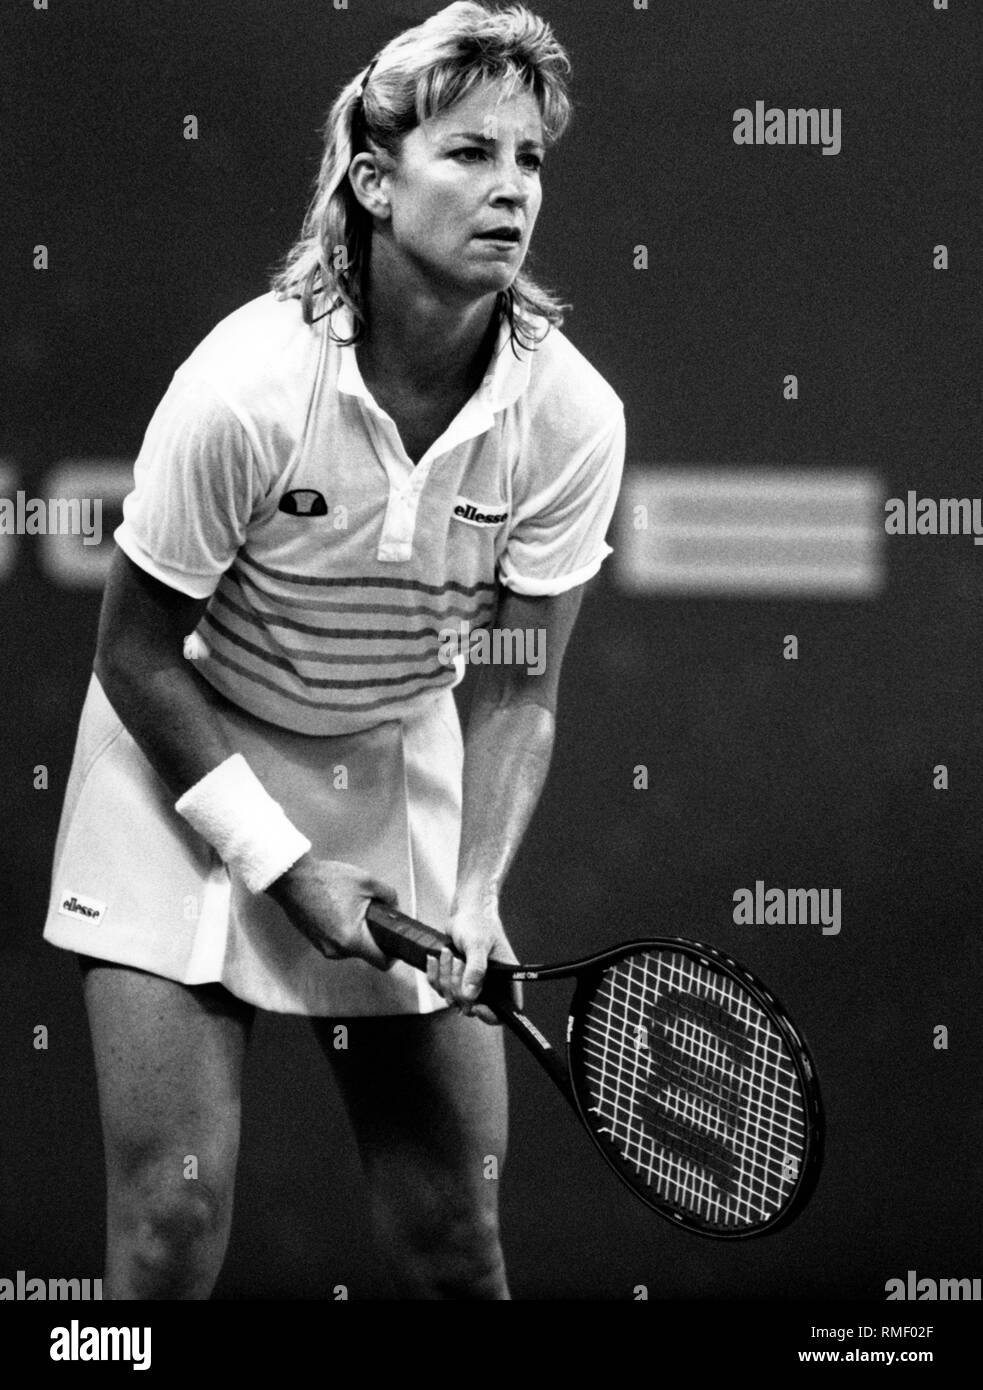 Chris evert lloyd hi-res stock photography and images - Alamy